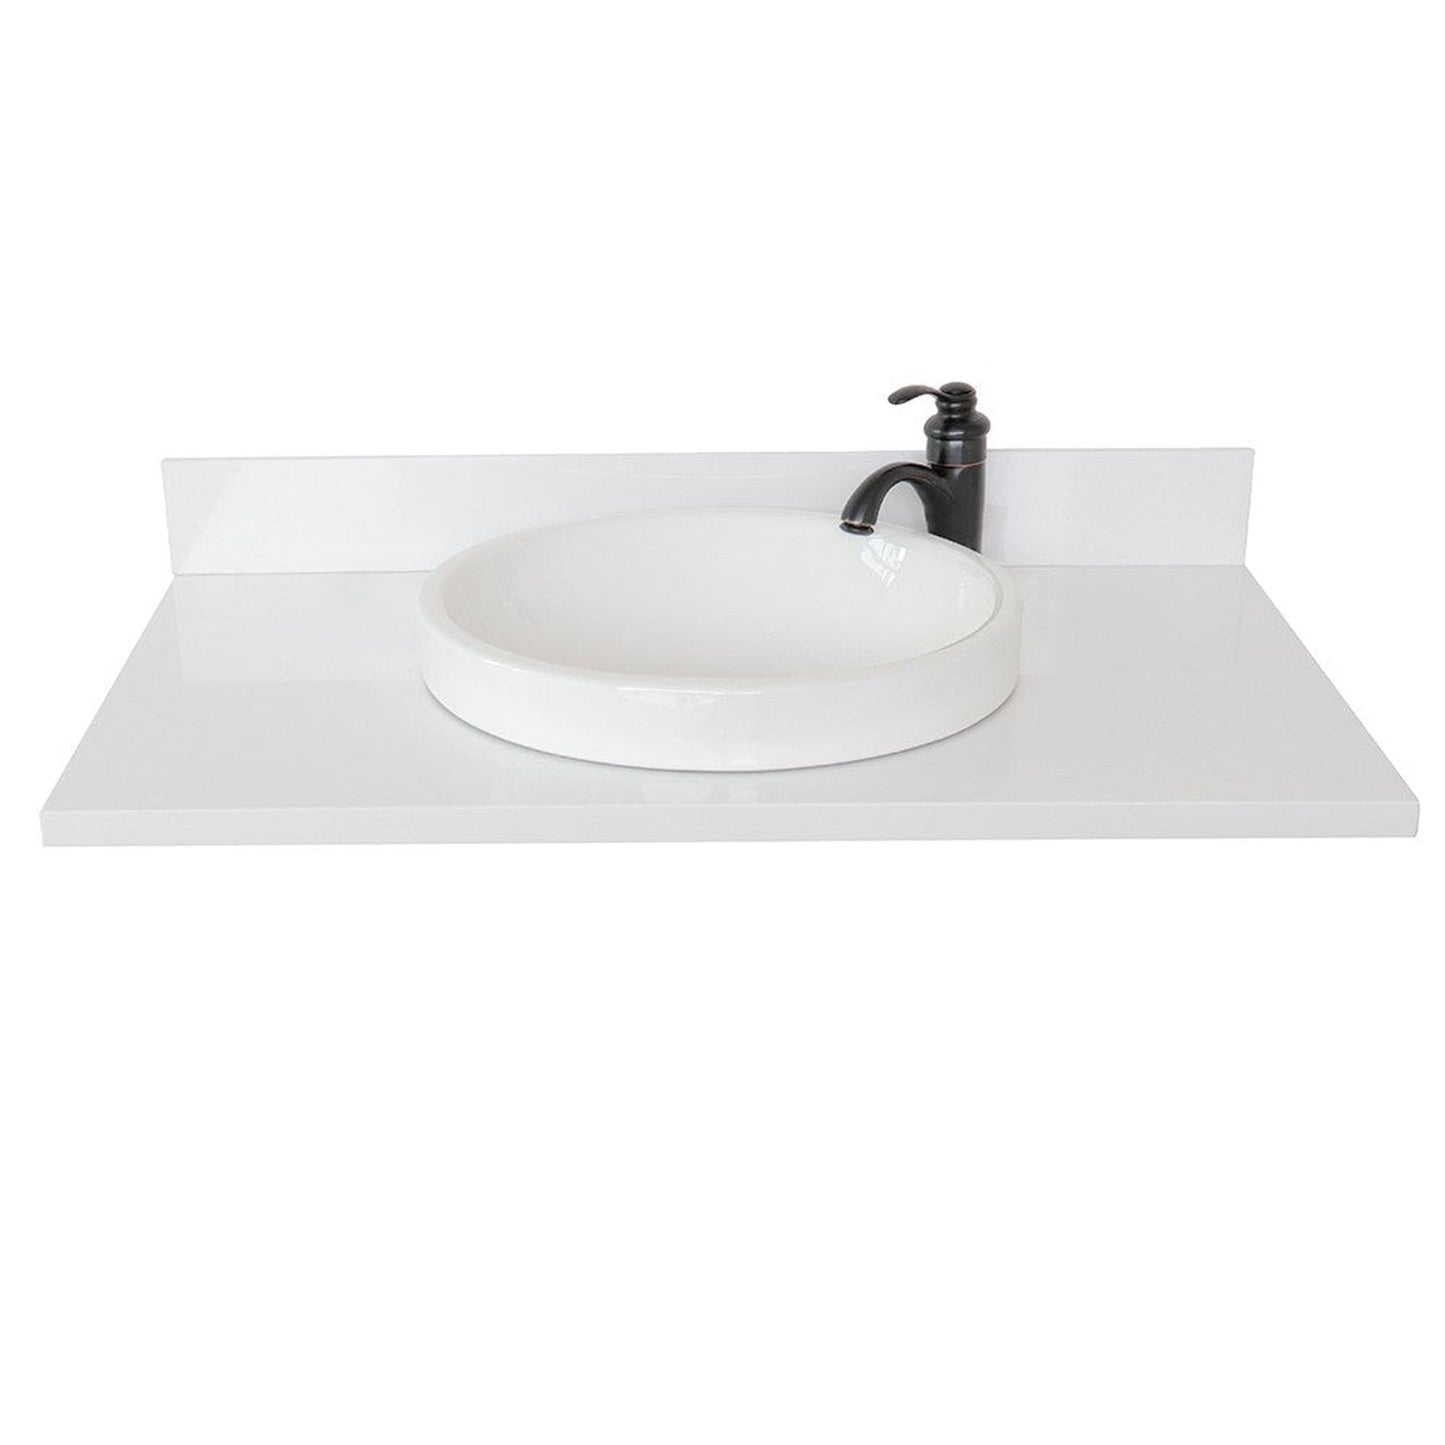 Bellaterra Home 37" x 22" White Quartz Vanity Top With Semi-recessed Round Sink and Overflow